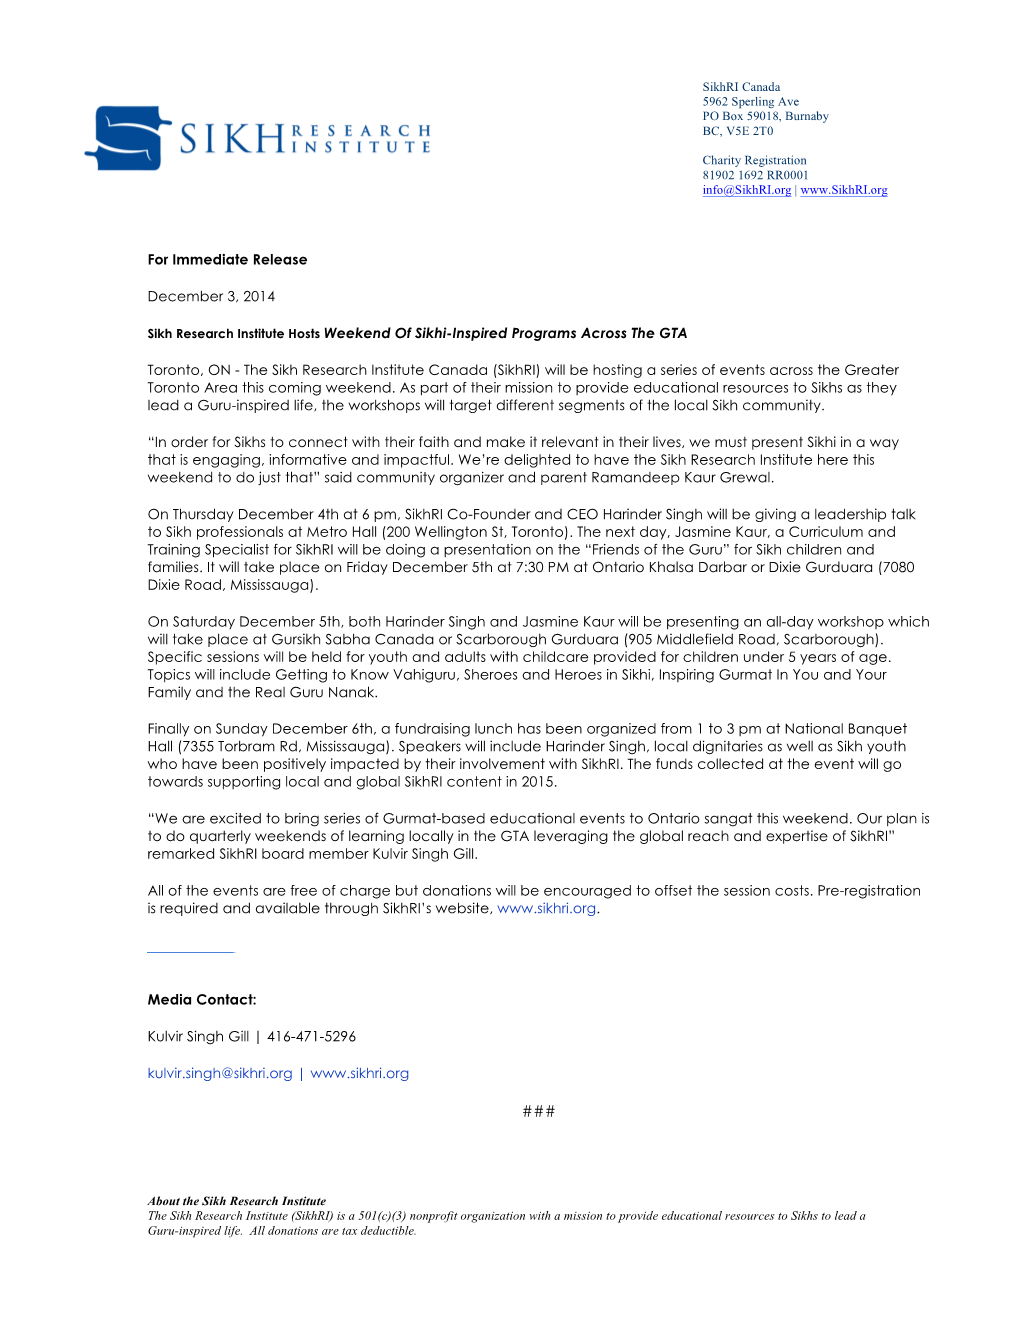 For Immediate Release December 3, 2014 Sikh Research Institute Hosts